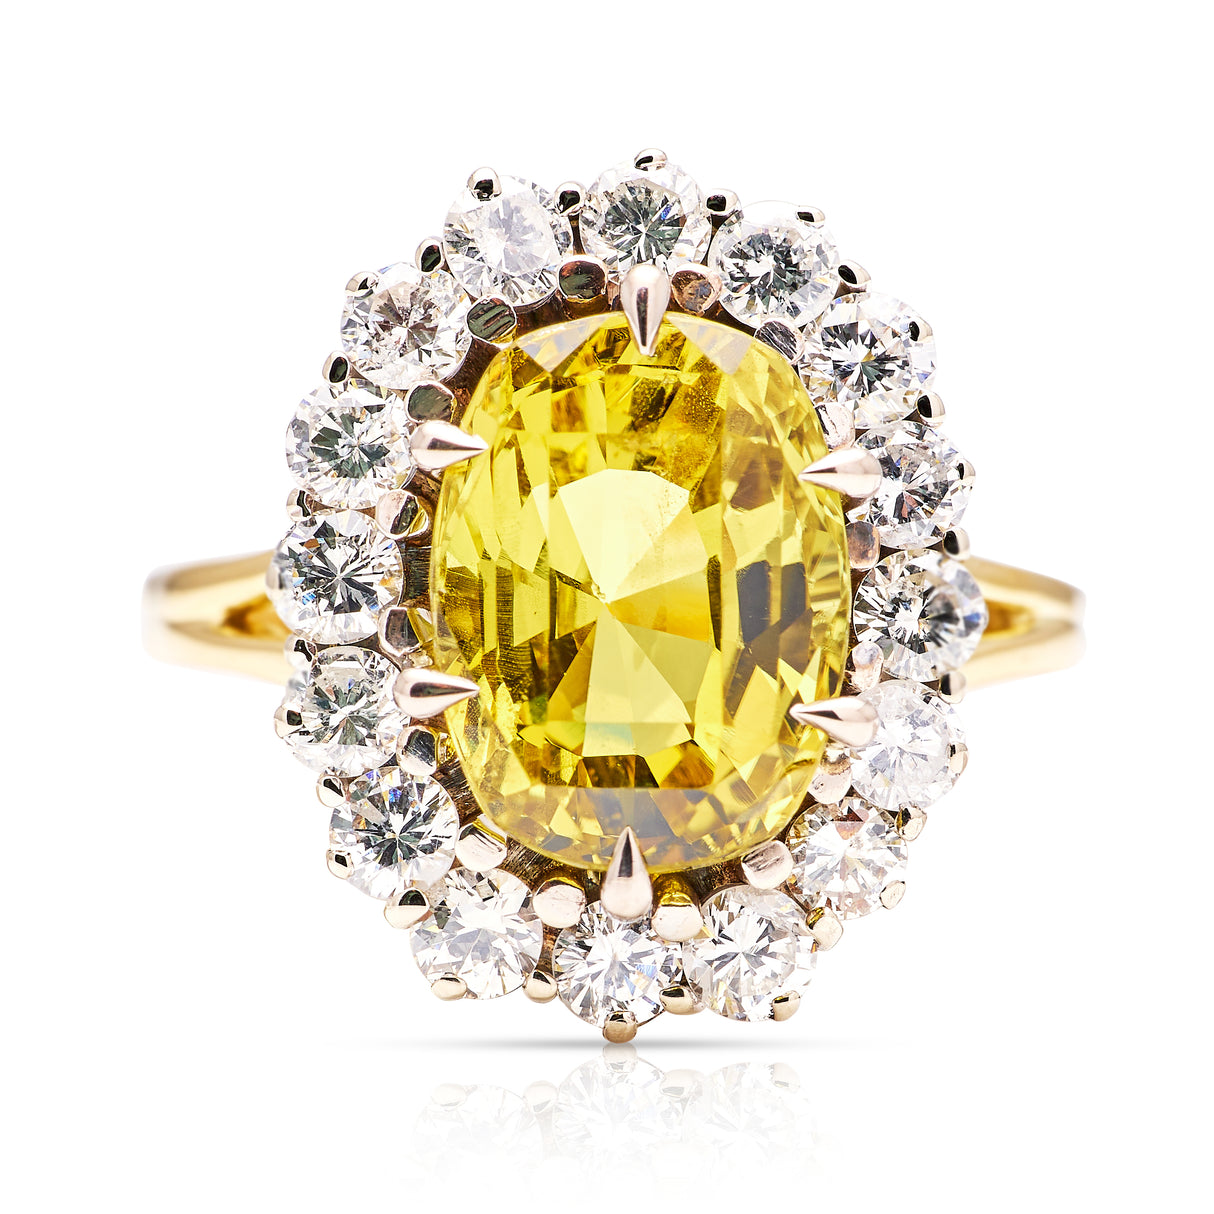 Vintage, 1980s chrysoberyl and diamond cluster cocktail ring, 18ct yellow gold